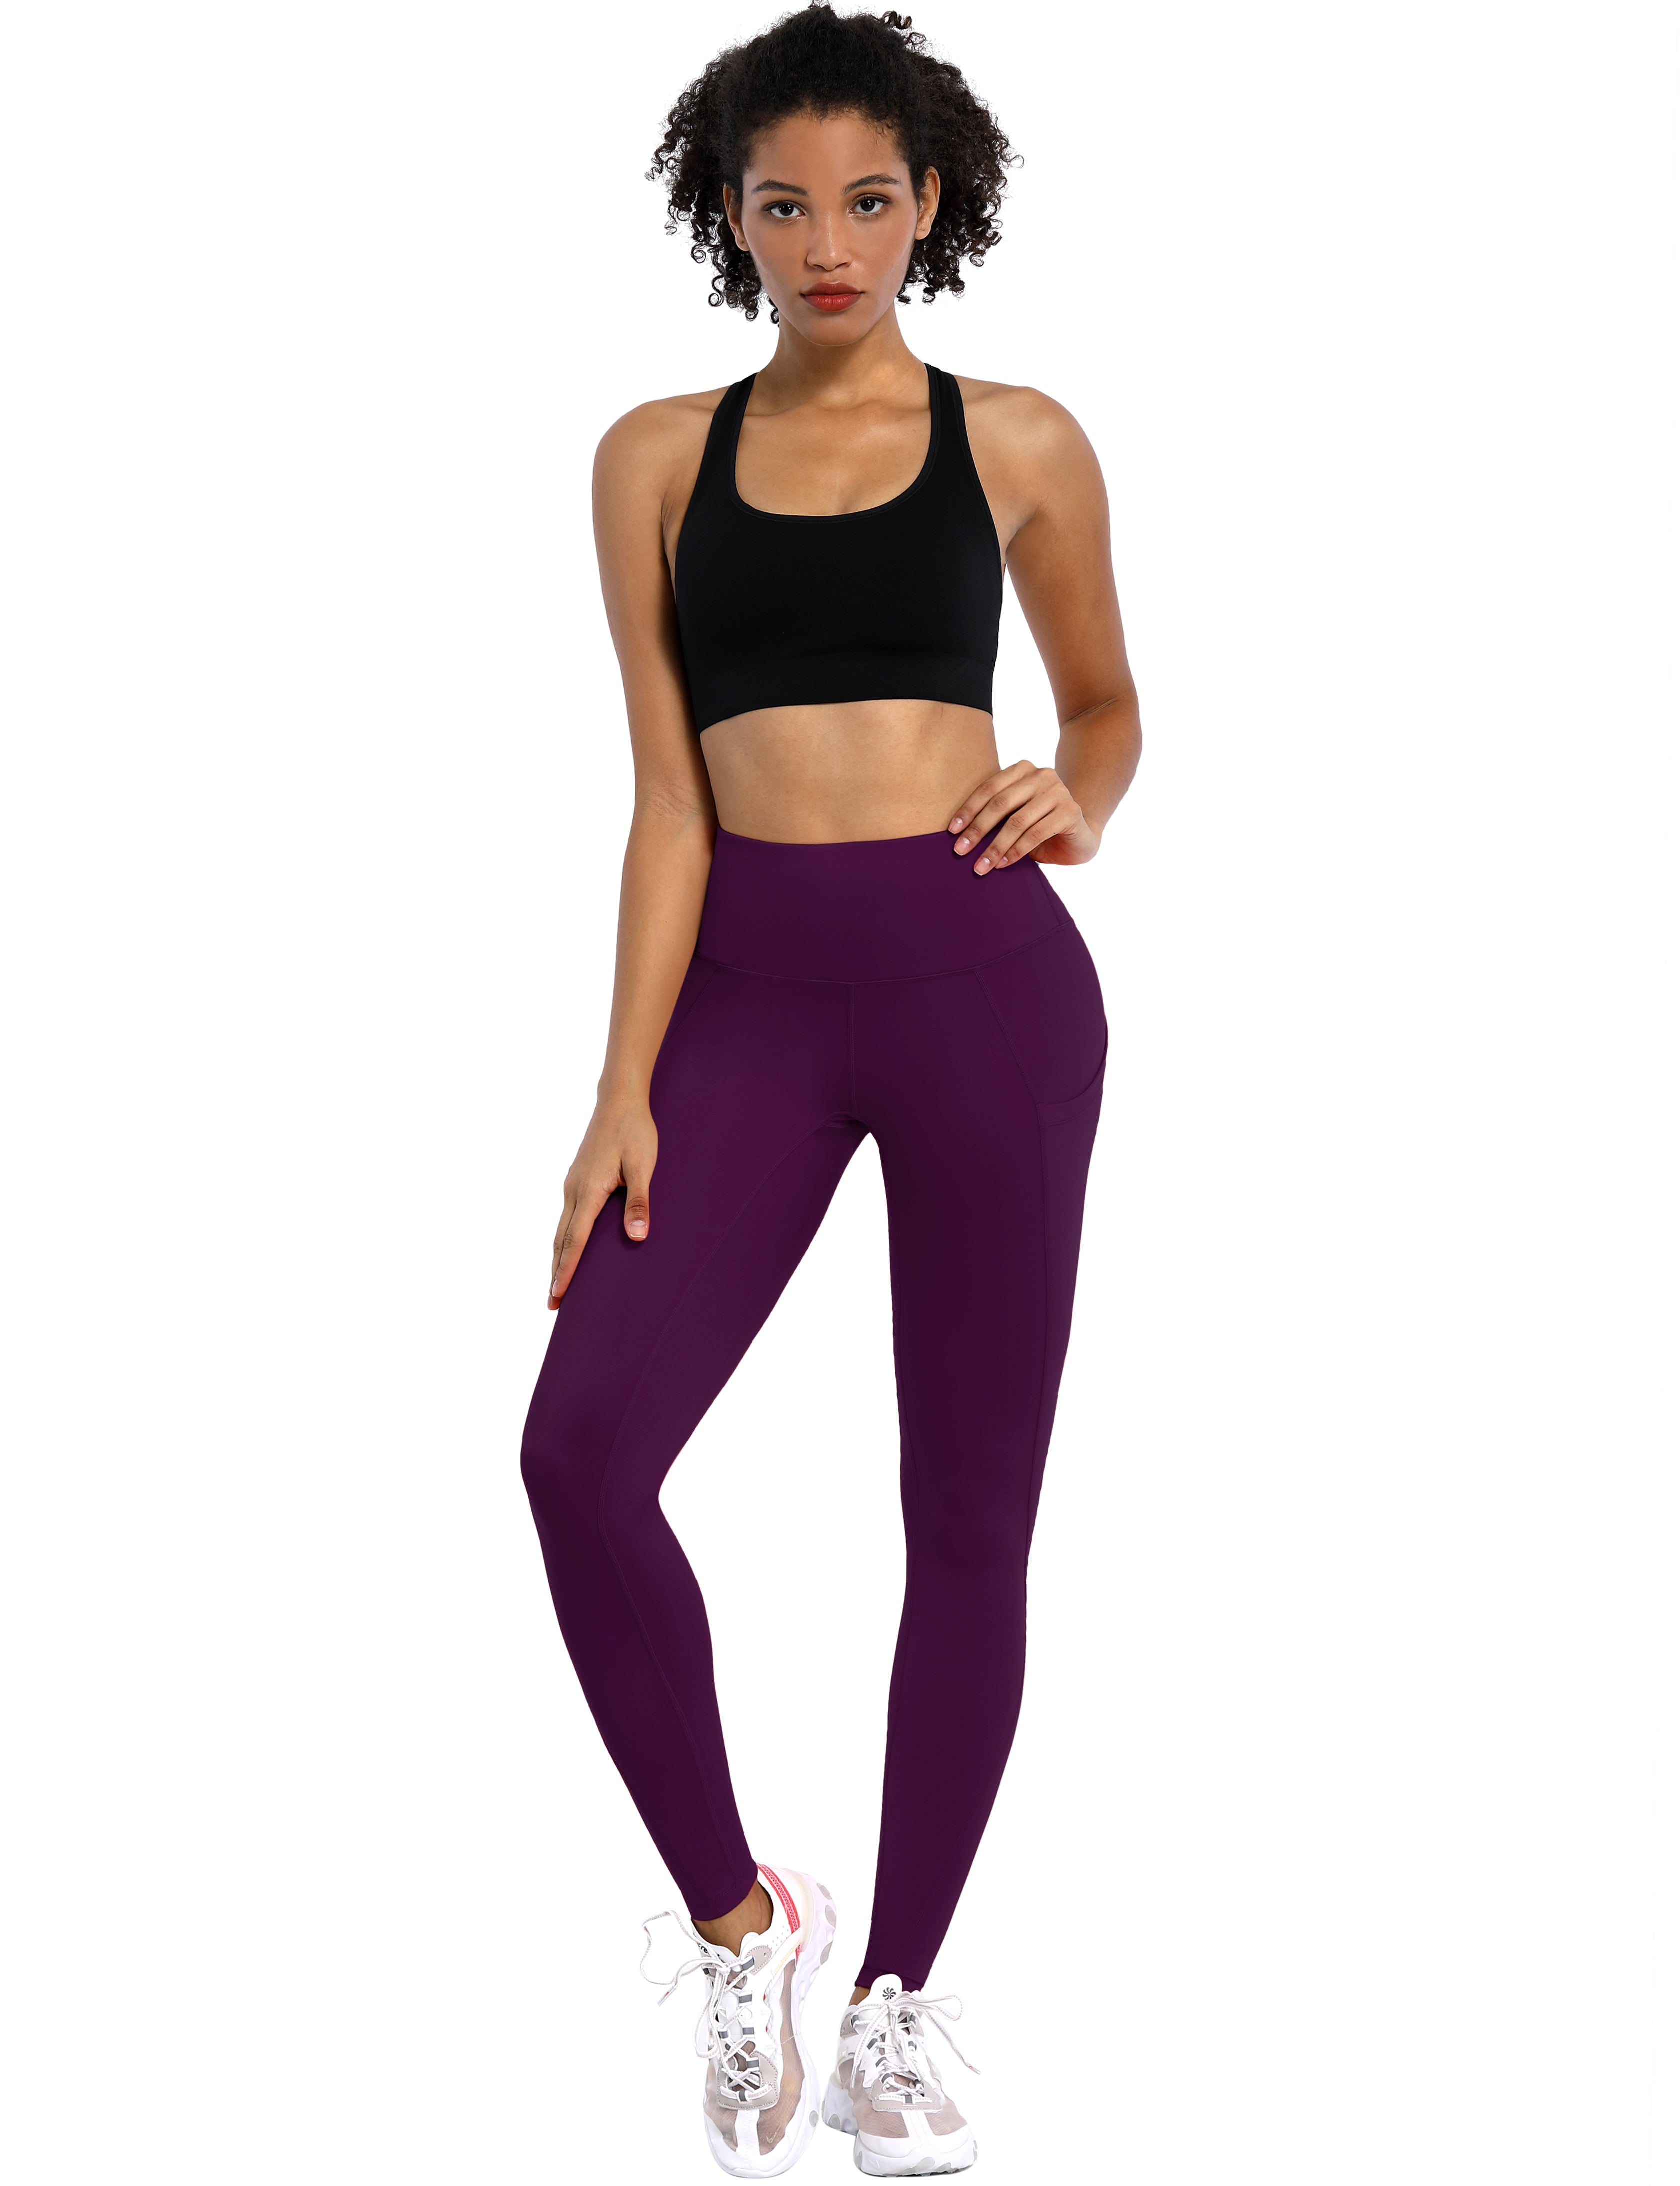 High Waist Side Pockets Golf Pants plum 75% Nylon, 25% Spandex Fabric doesn't attract lint easily 4-way stretch No see-through Moisture-wicking Tummy control Inner pocket